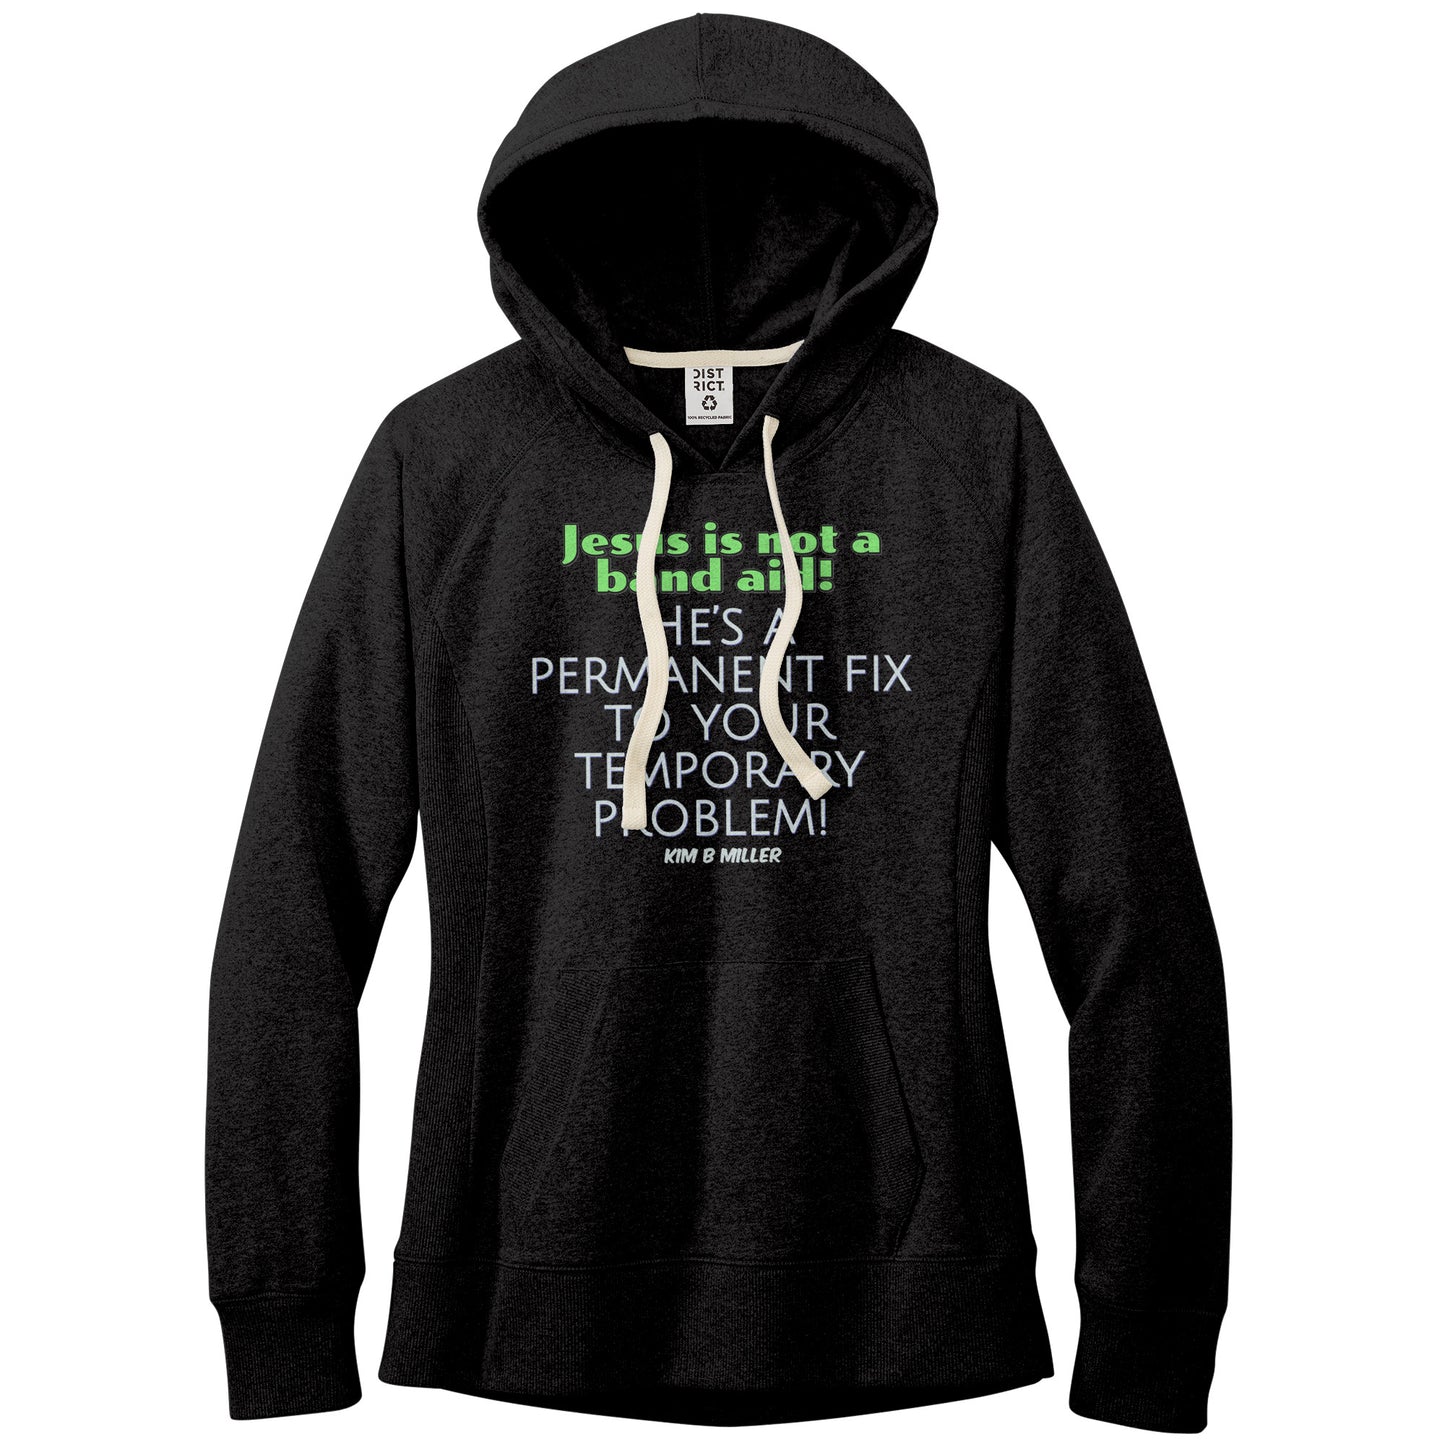 Jesus Band Aid District Women's Re-Fleece Hoodie (Both Sides)